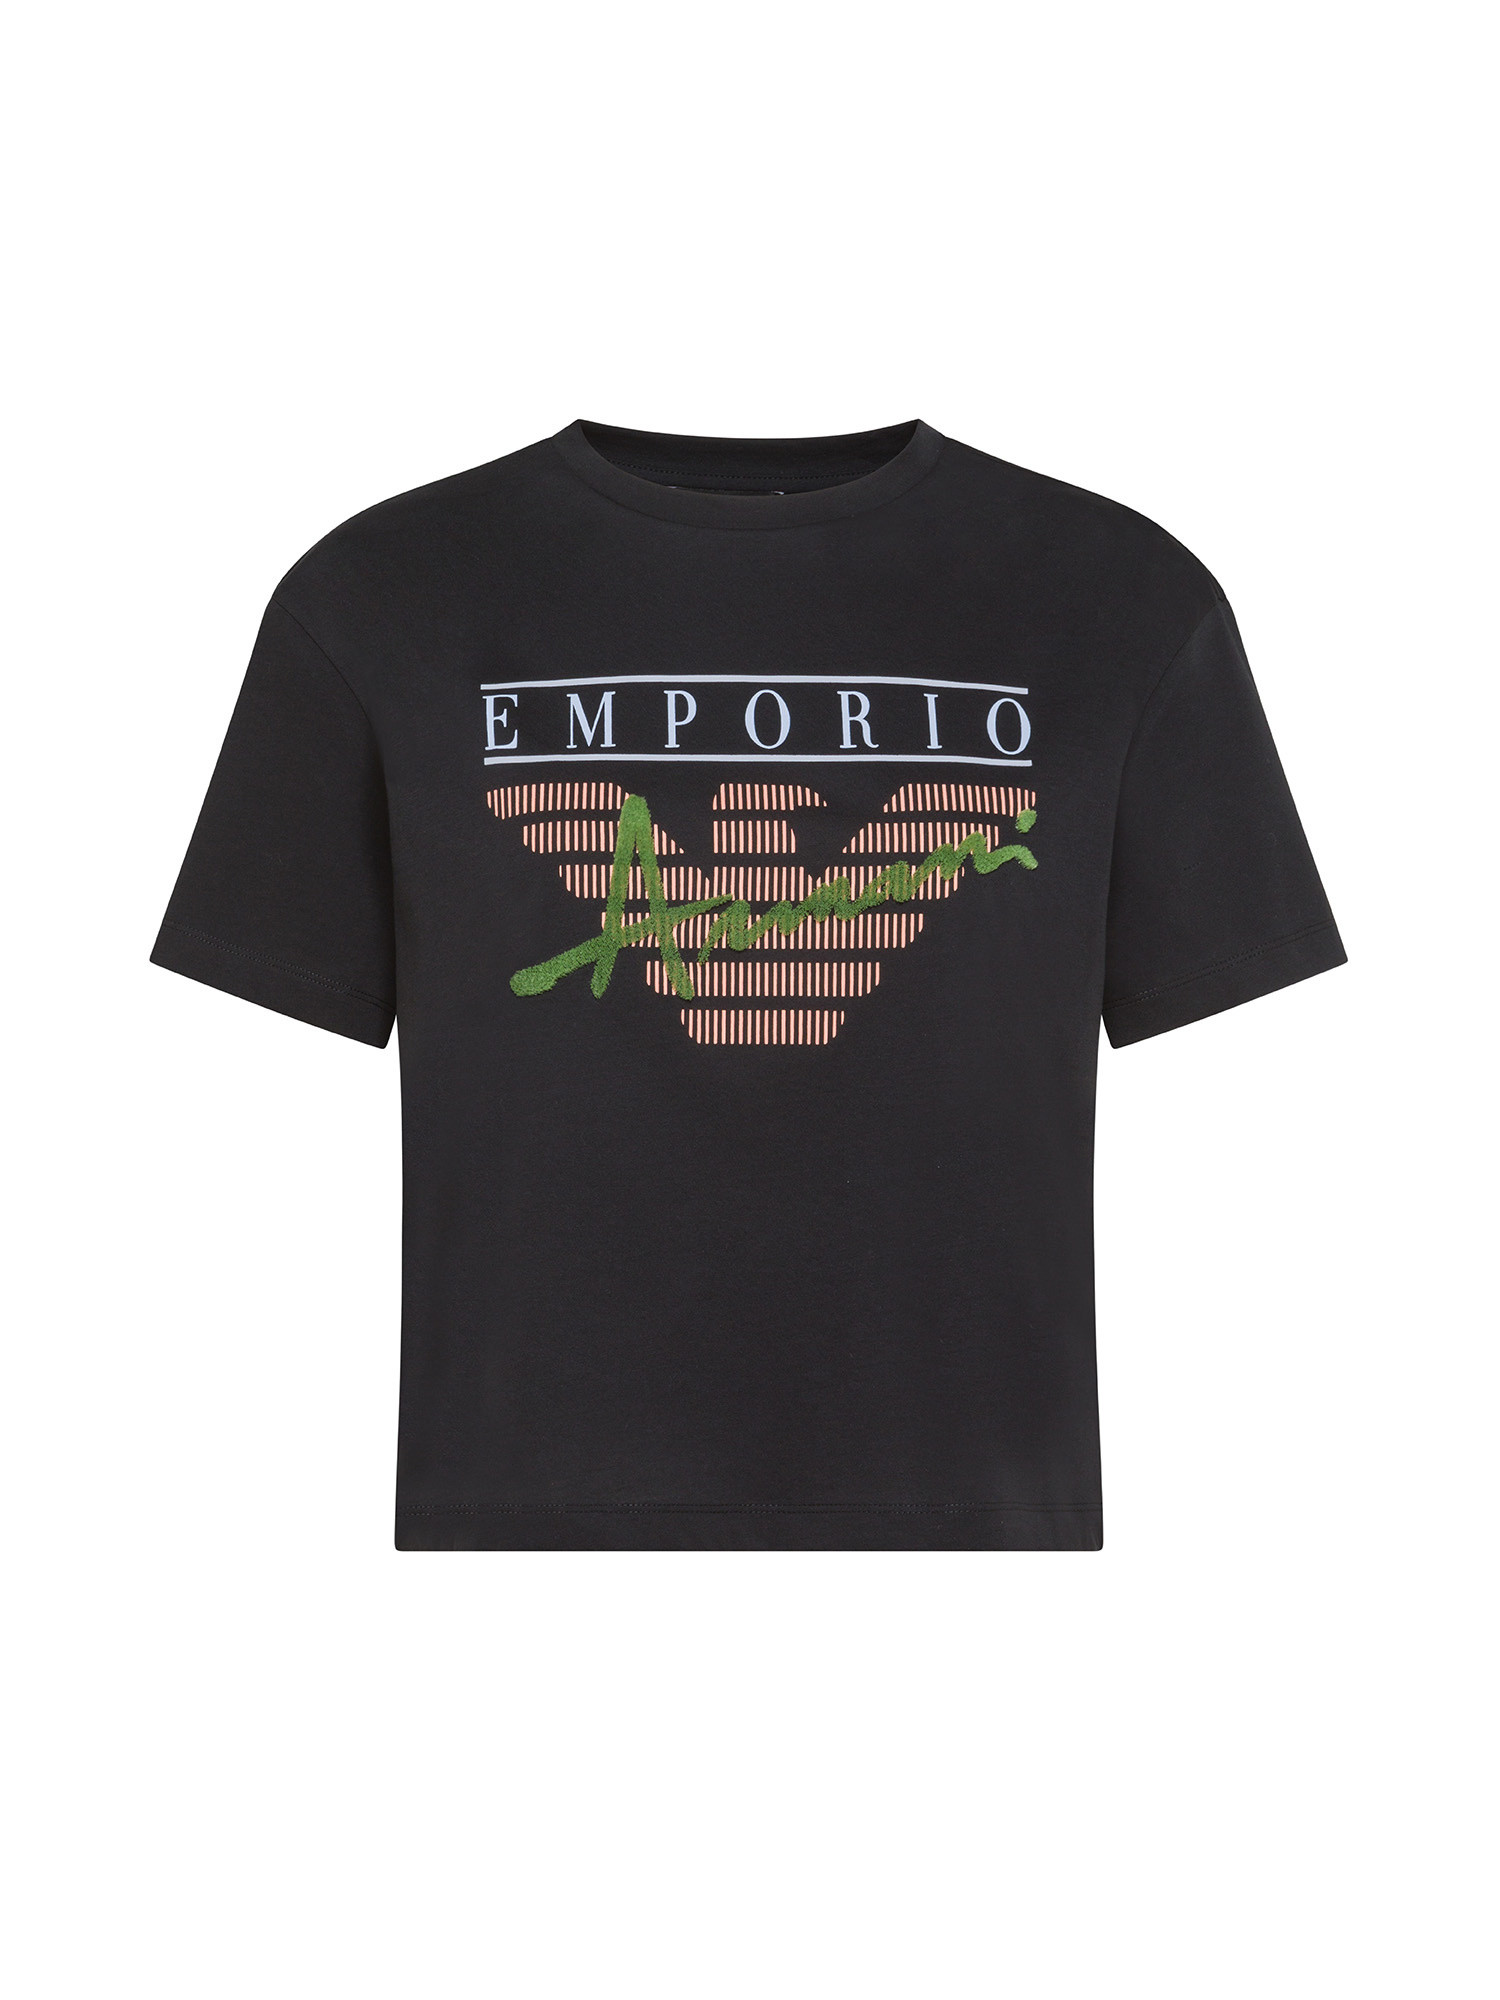 Emporio Armani - Cotton T-shirt with print and logo, Black, large image number 0